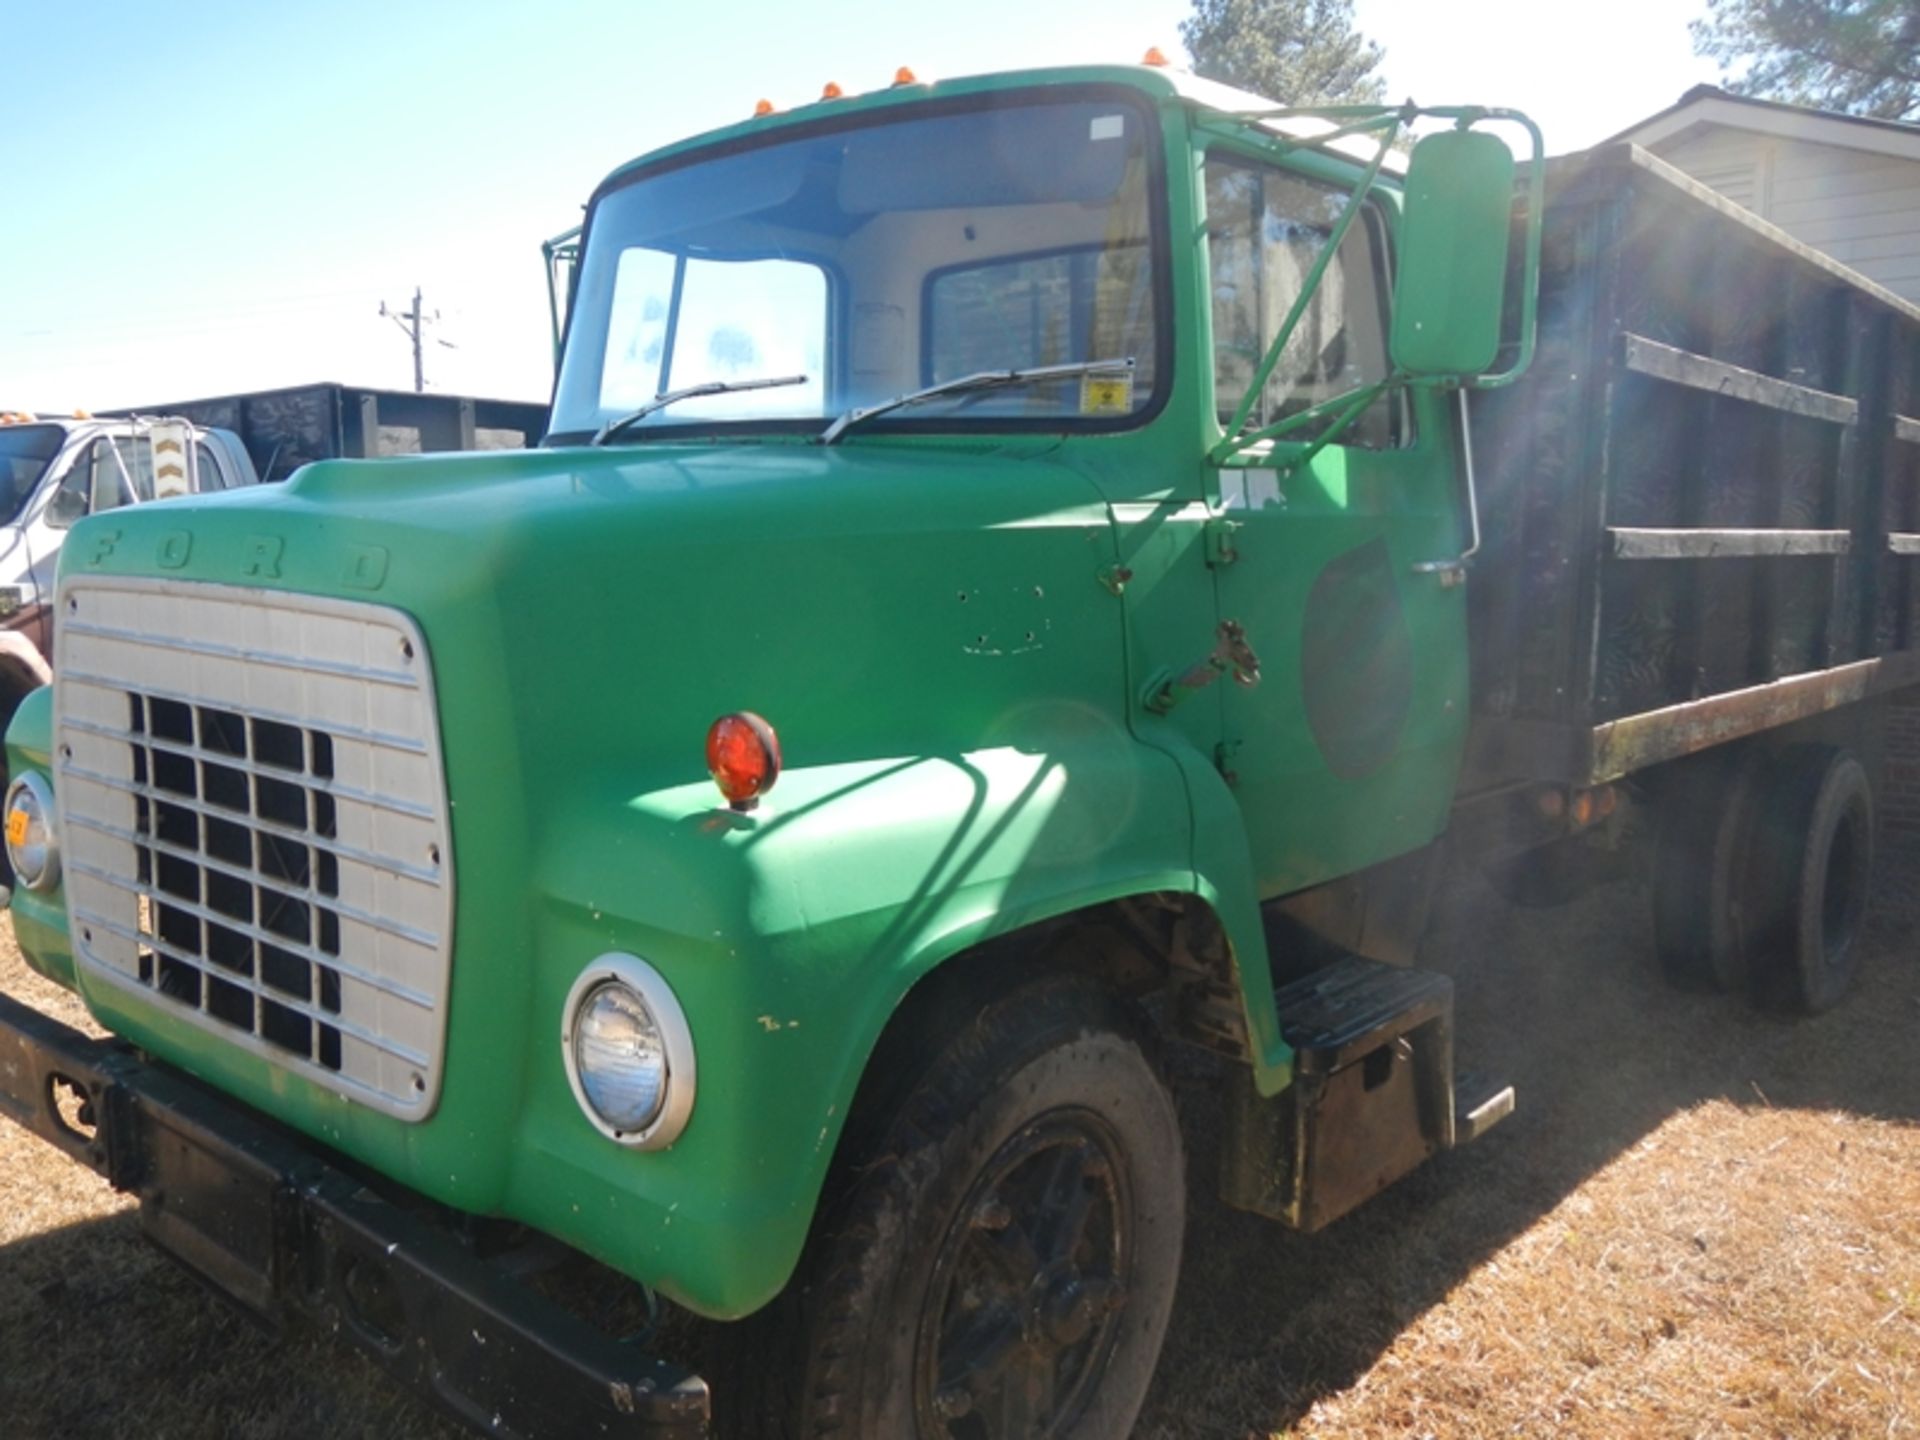 1974 Ford 2 ton vin N70EVS15235 runs but needs tuneup been sitting several years - Image 4 of 5